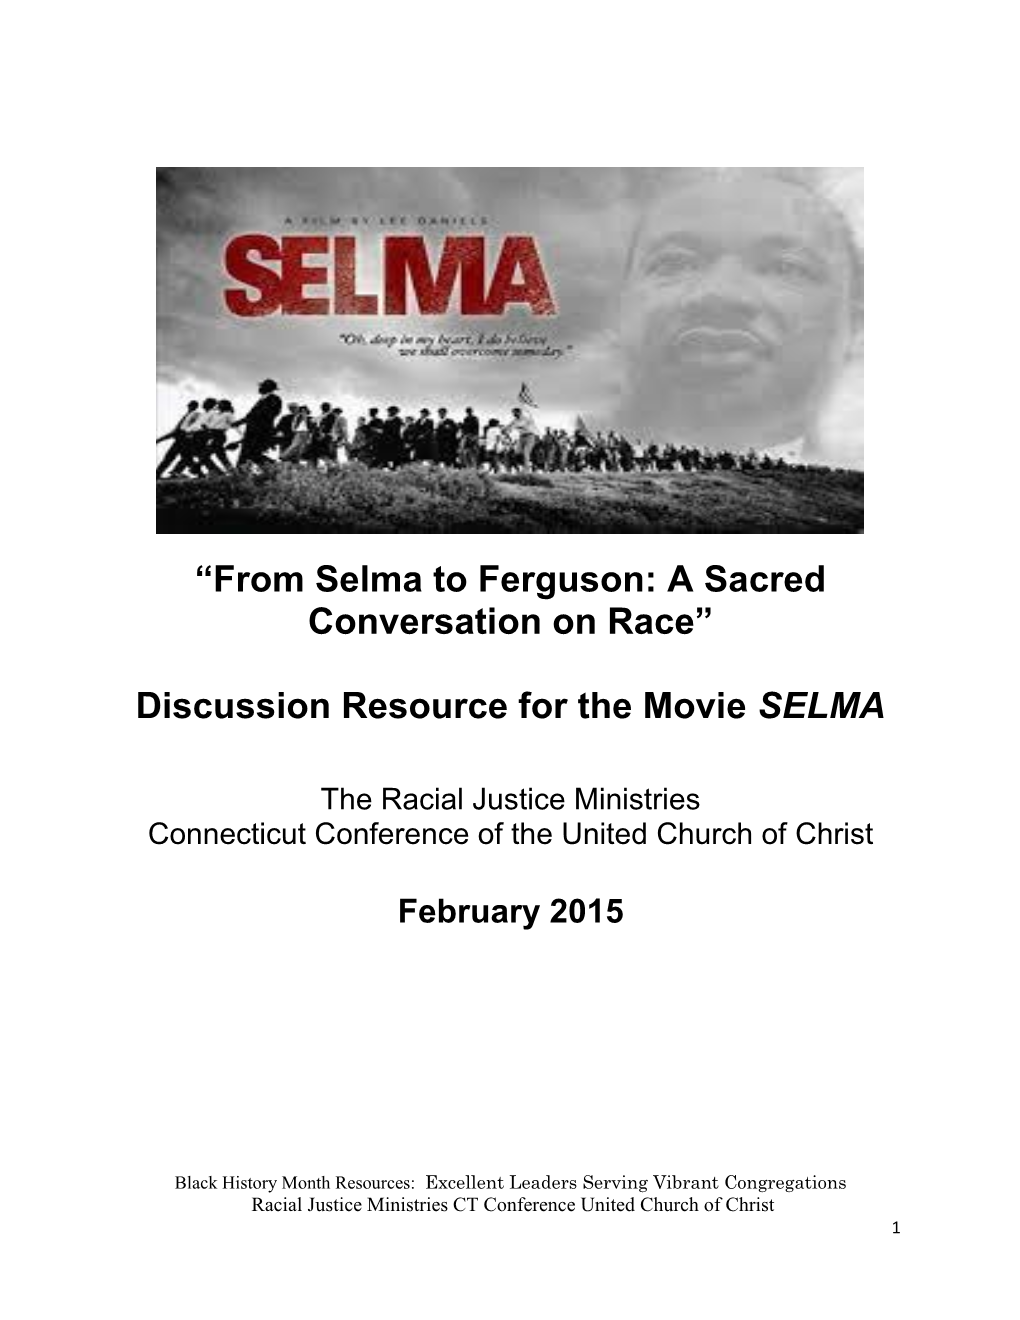 Discussion Resource for the Movie SELMA